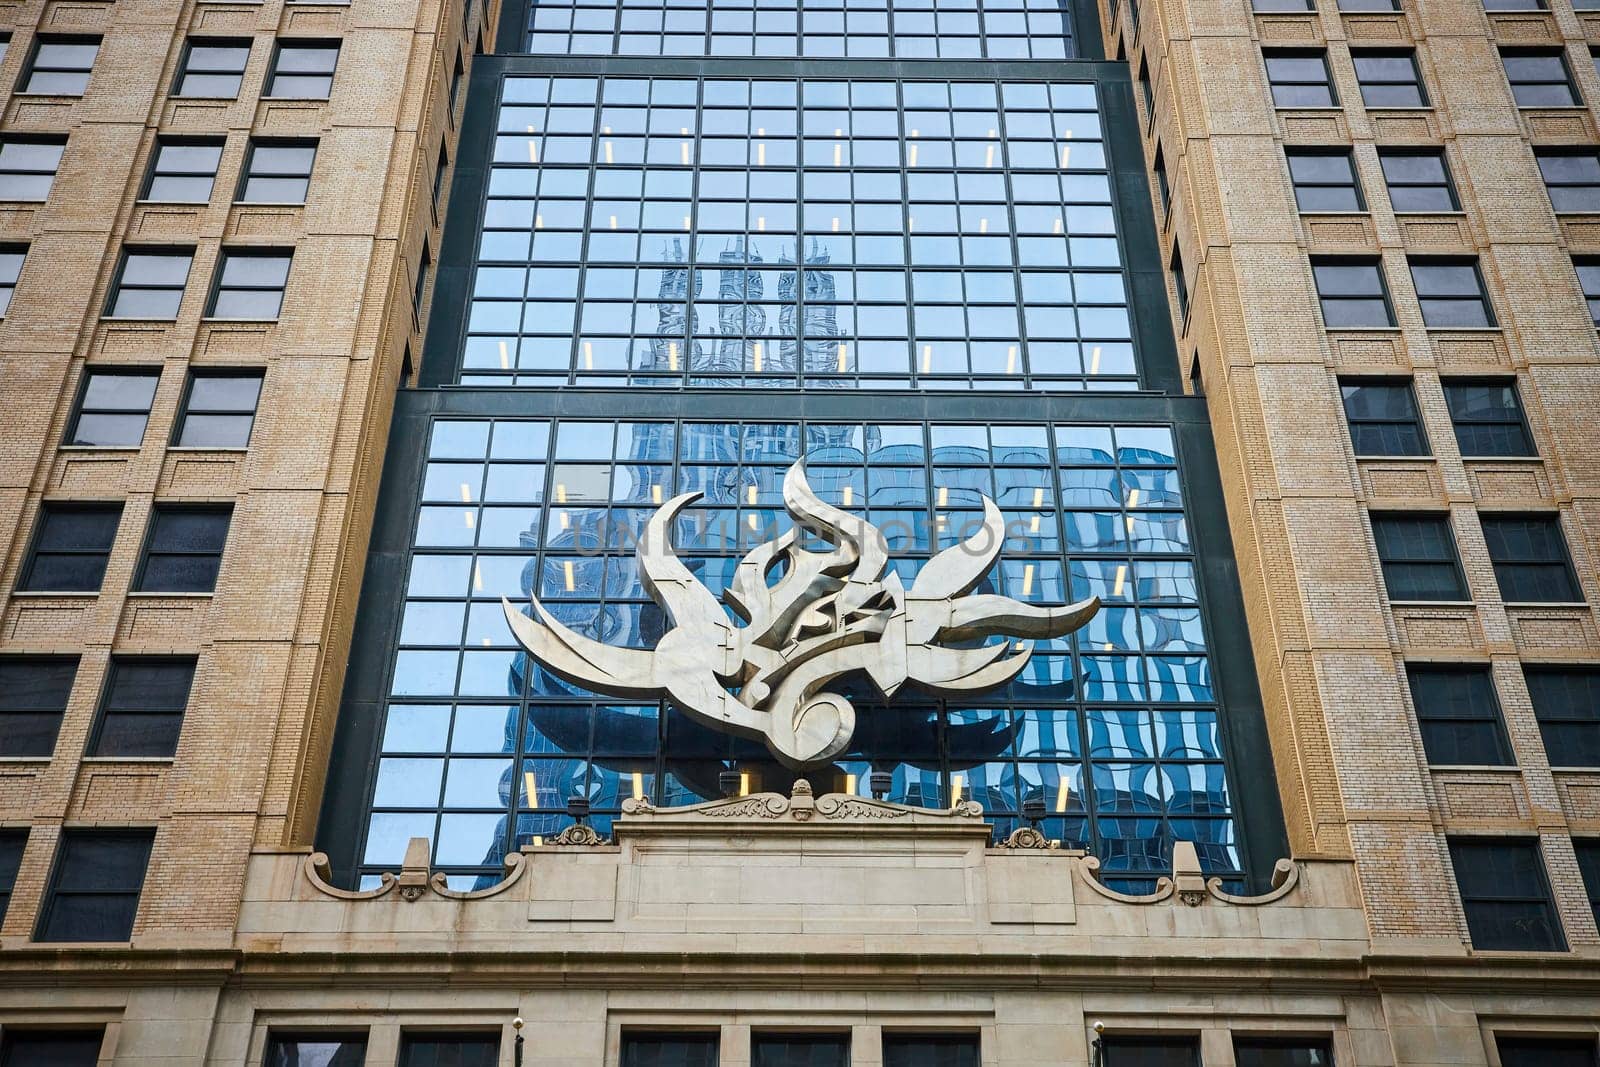 Image of Chicago public art, abstract flame sculpture on downtown building with reflective blue windows